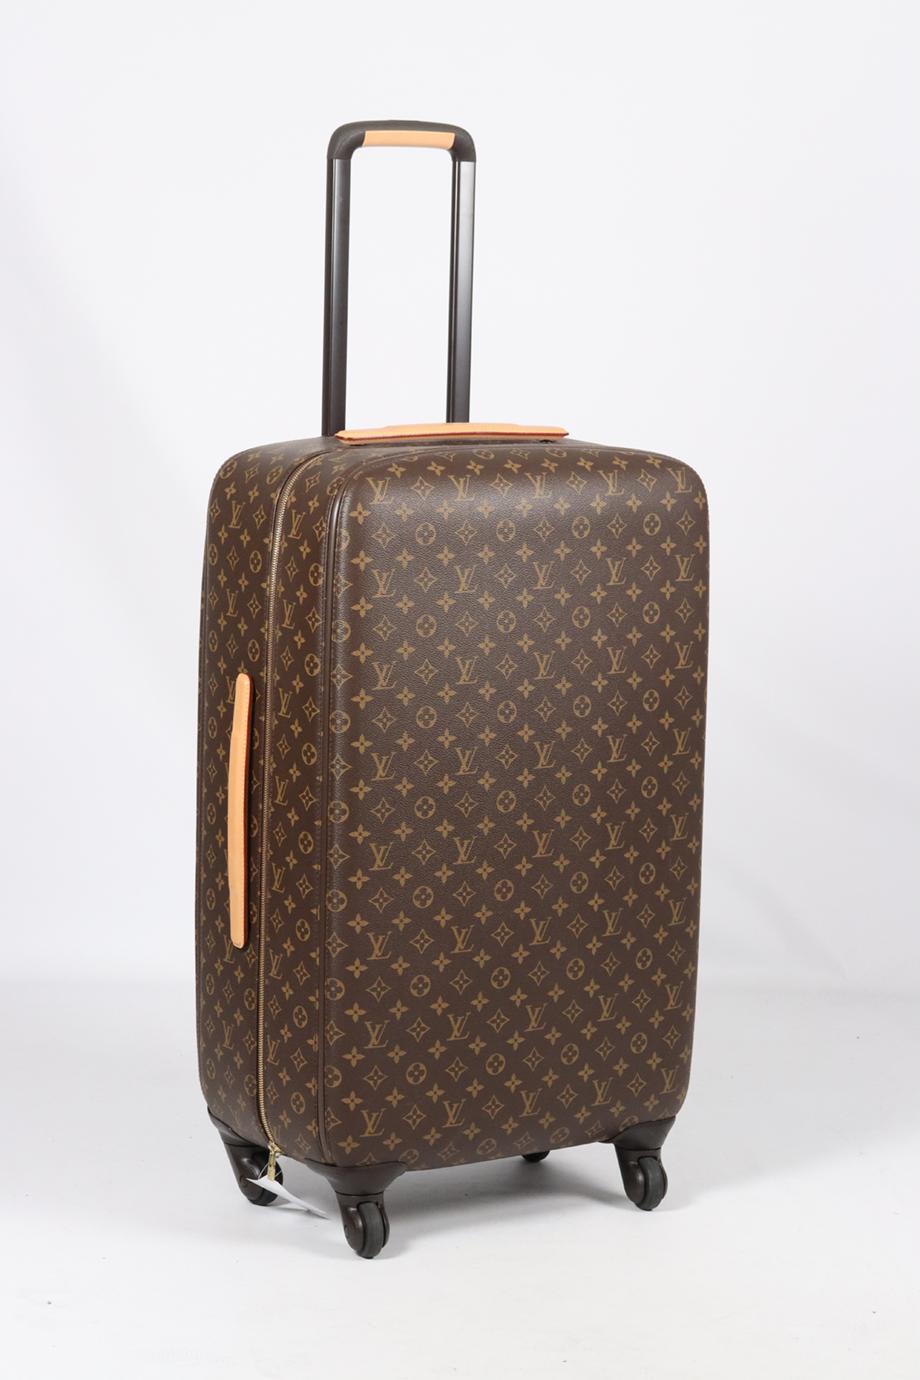 
Louis Vuitton Zephyr 70 Monogram Coated Canvas And Leather Suitcase.
Brown.
Zip fastening - Top.
Comes with - dustbag and box.
<strong>Height: 26.2 in.</strong>
<strong>Width: 17.1 in.</strong>
<strong>Depth: 10.2 in.</strong>
<strong>Handle drop: